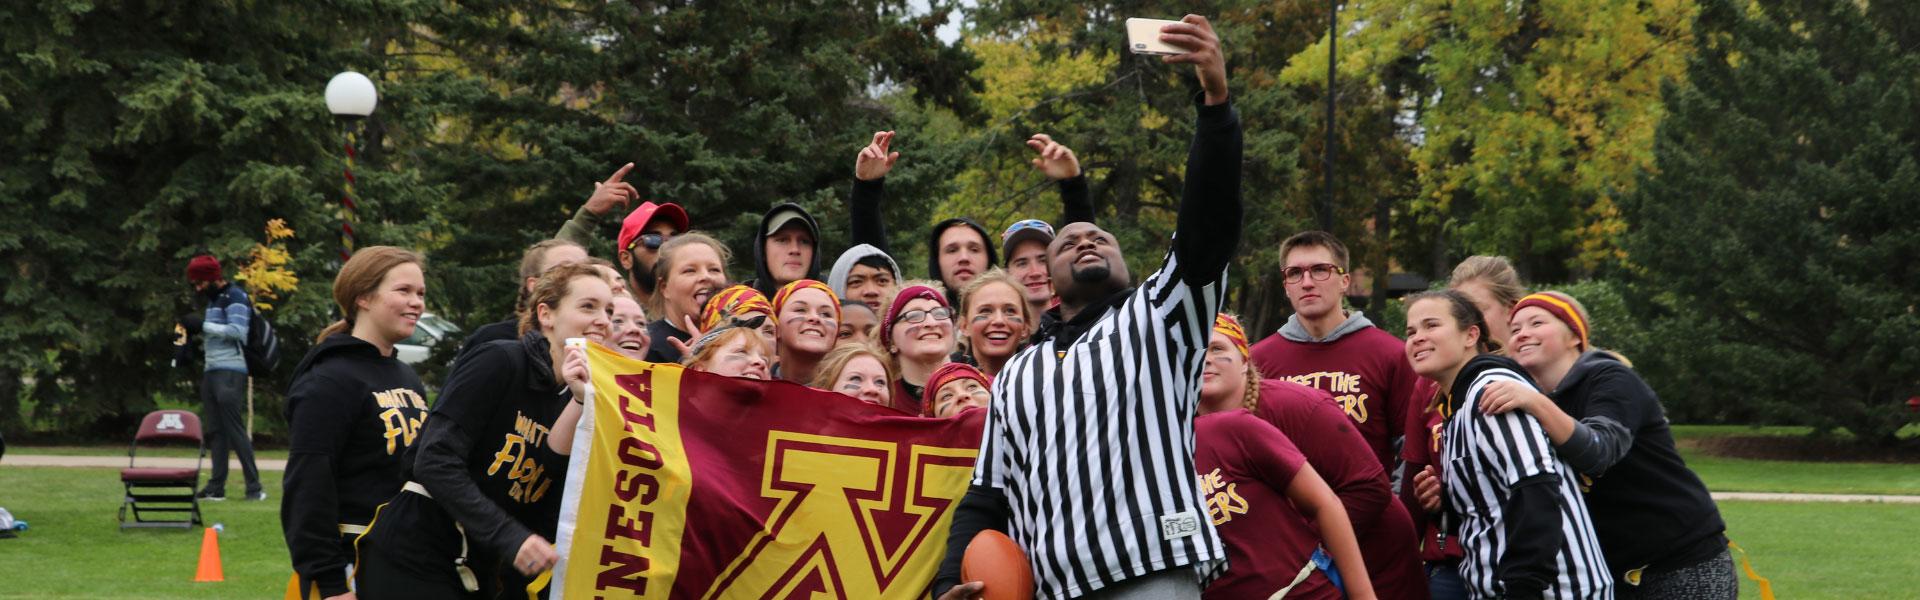 A group of students playing powder puff football during homecoming pose for a selfie with the referees.